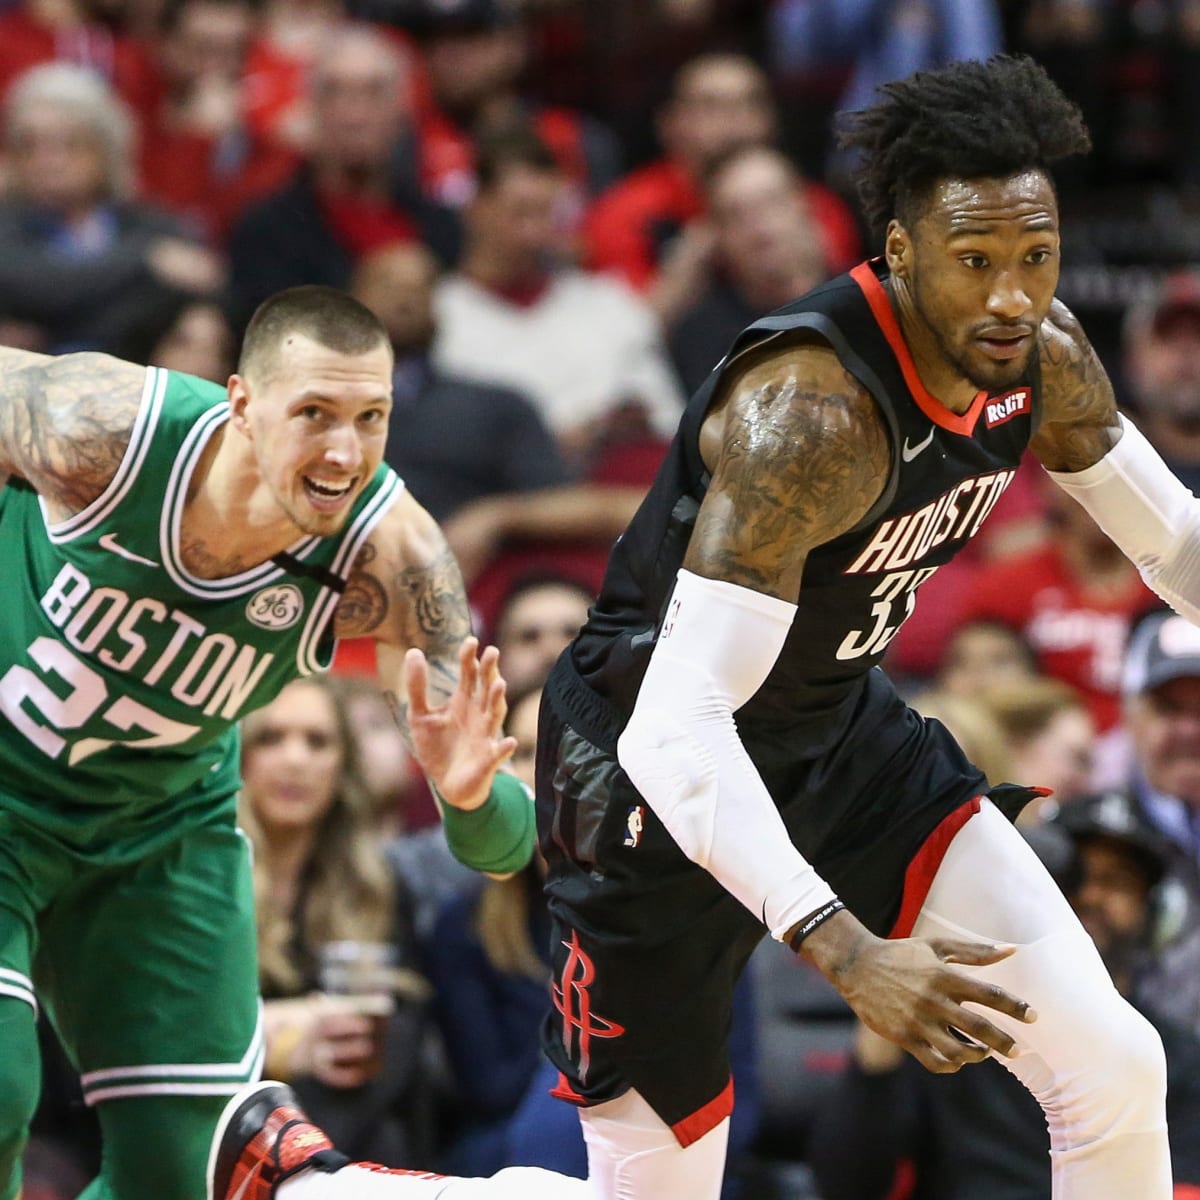 Rockets' Robert Covington: This thing is unpredictable